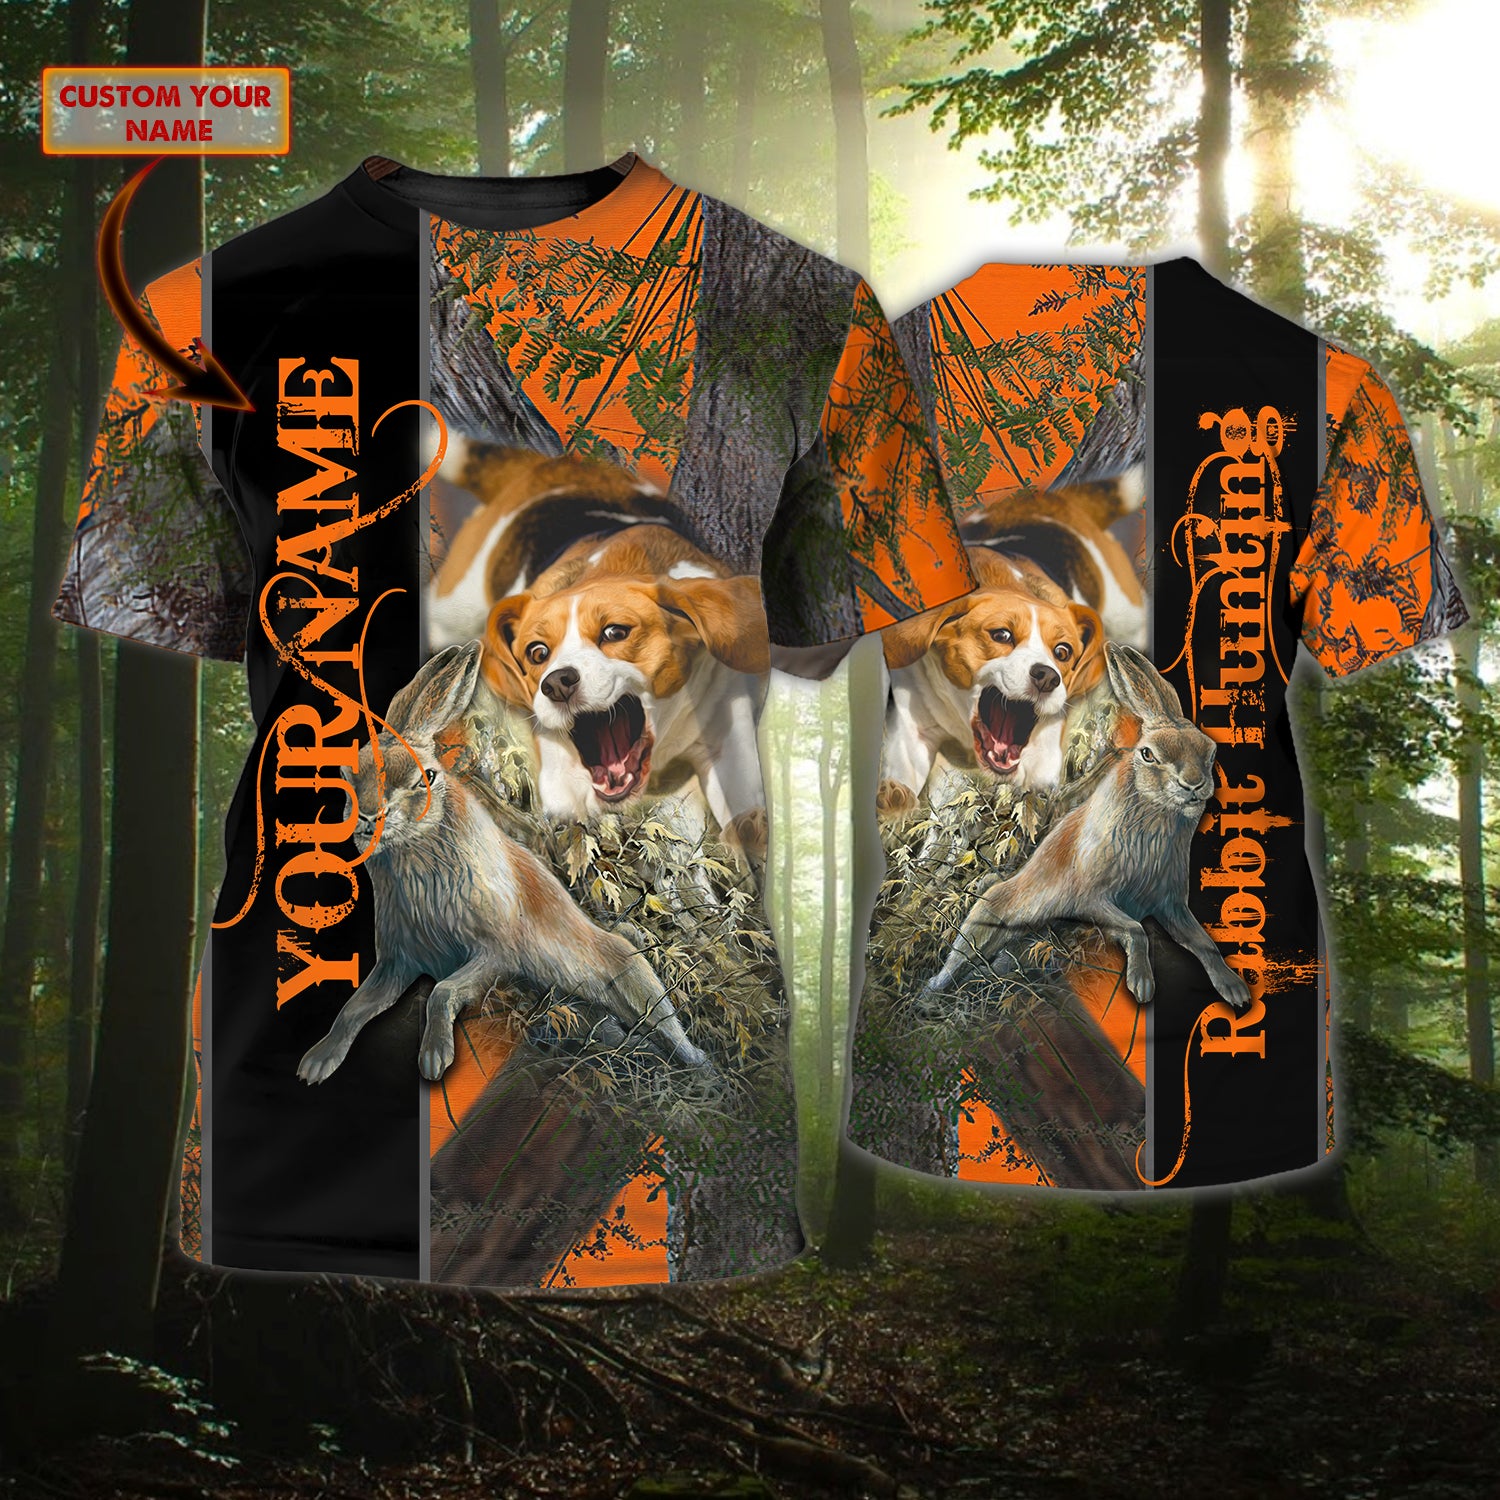 BEAGLE - Personalized Name 3D Tshirt - H98 - 005